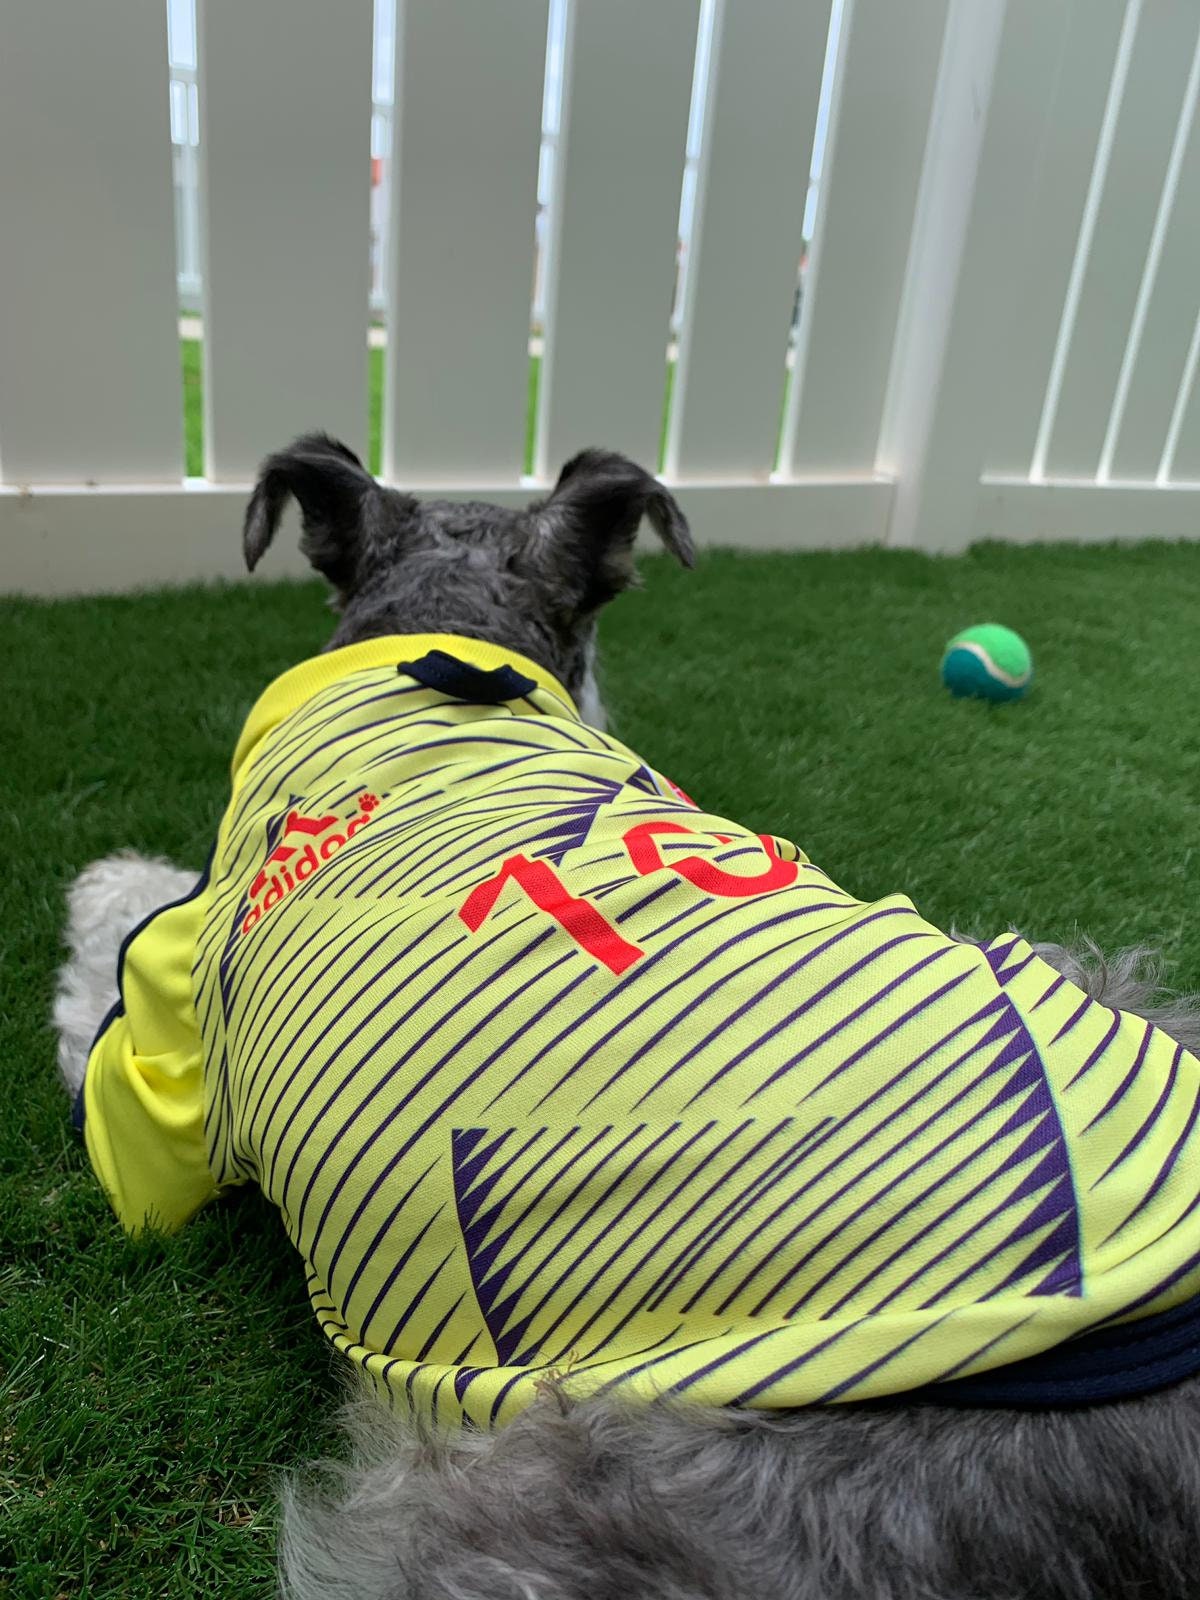 Colombia Football Dog Jersey 